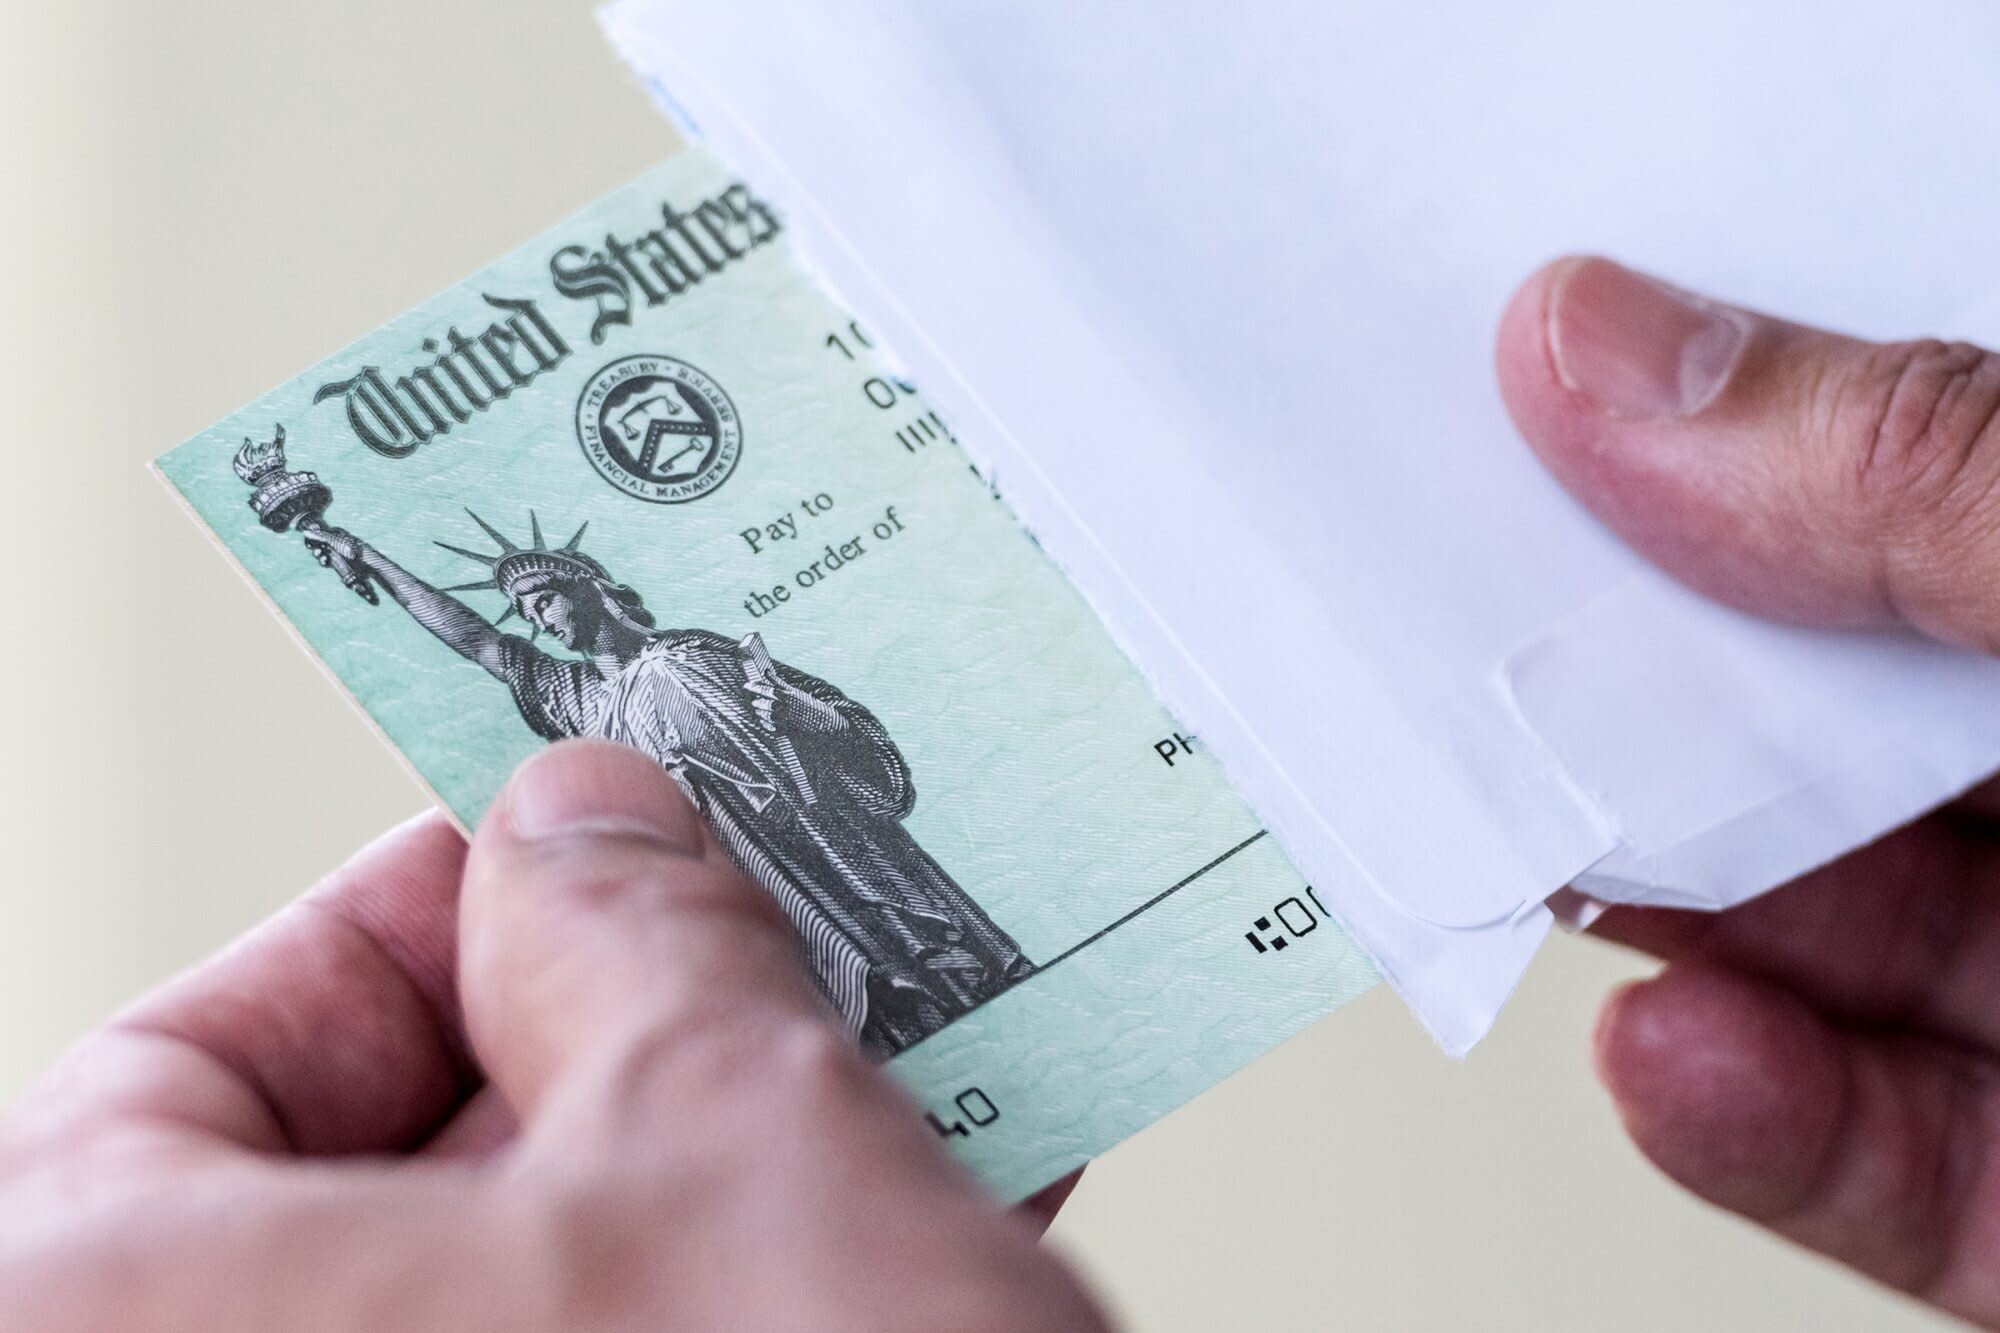 See why you haven’t received your stimulus check yet – and what you can do now